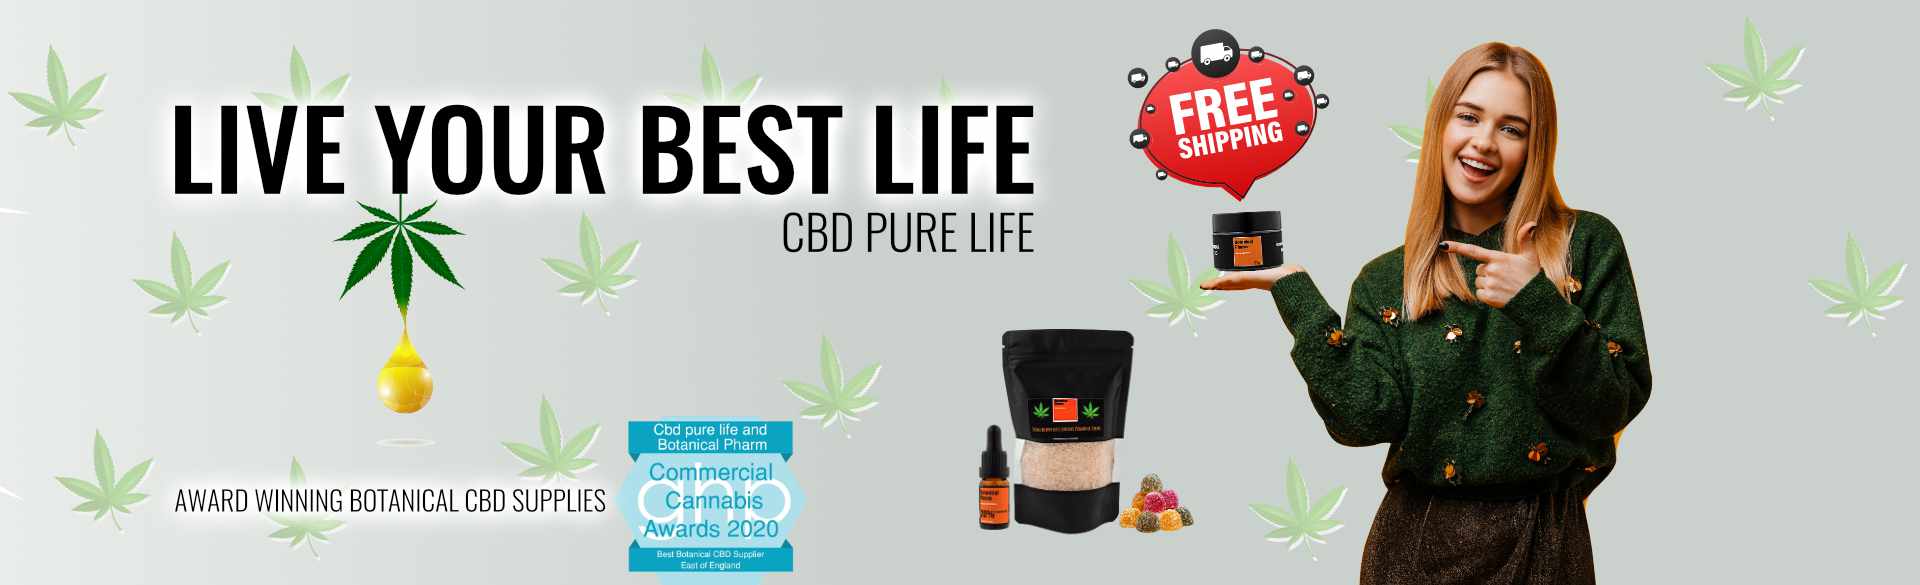 live your best life cbd pure life